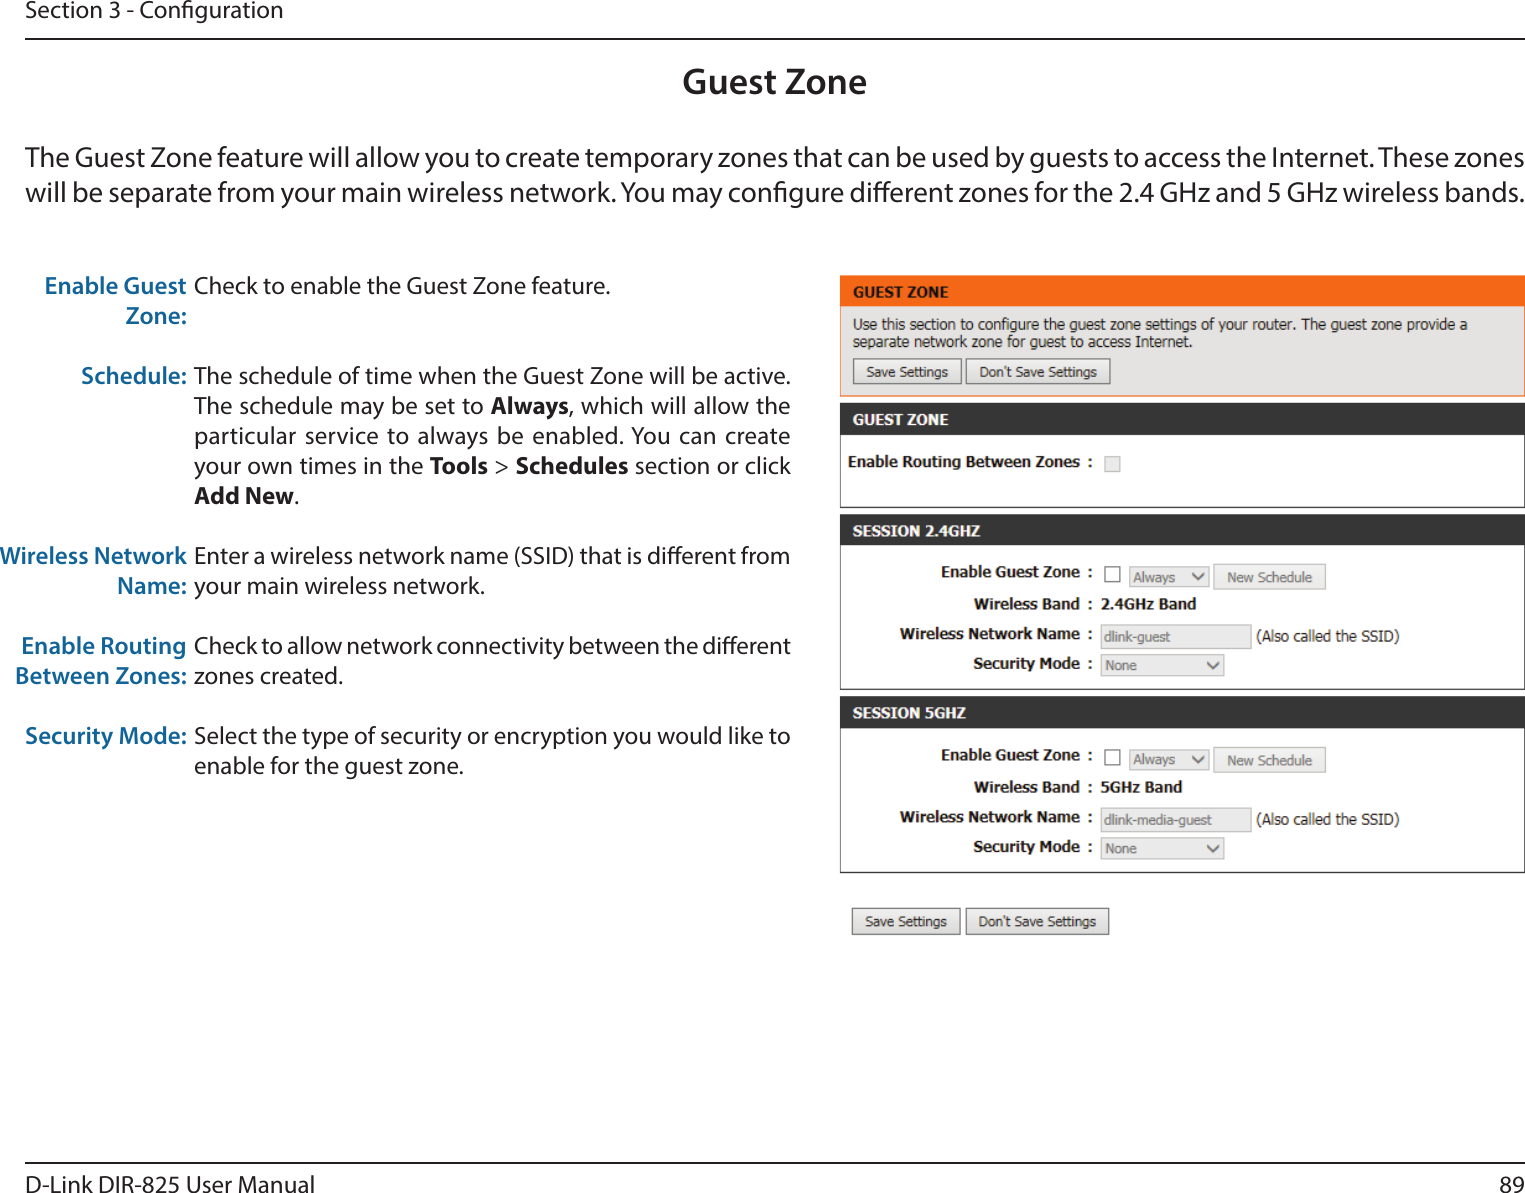 89D-Link DIR-825 User ManualSection 3 - CongurationGuest ZoneCheck to enable the Guest Zone feature. The schedule of time when the Guest Zone will be active. The schedule may be set to Always, which will allow the particular service to always be enabled. You can create your own times in the Tools &gt; Schedules section or click Add New.Enter a wireless network name (SSID) that is dierent from your main wireless network.Check to allow network connectivity between the dierent zones created. Select the type of security or encryption you would like to enable for the guest zone.  Enable Guest Zone:Schedule:Wireless Network Name:Enable Routing Between Zones:Security Mode:The Guest Zone feature will allow you to create temporary zones that can be used by guests to access the Internet. These zones will be separate from your main wireless network. You may congure dierent zones for the 2.4 GHz and 5 GHz wireless bands.